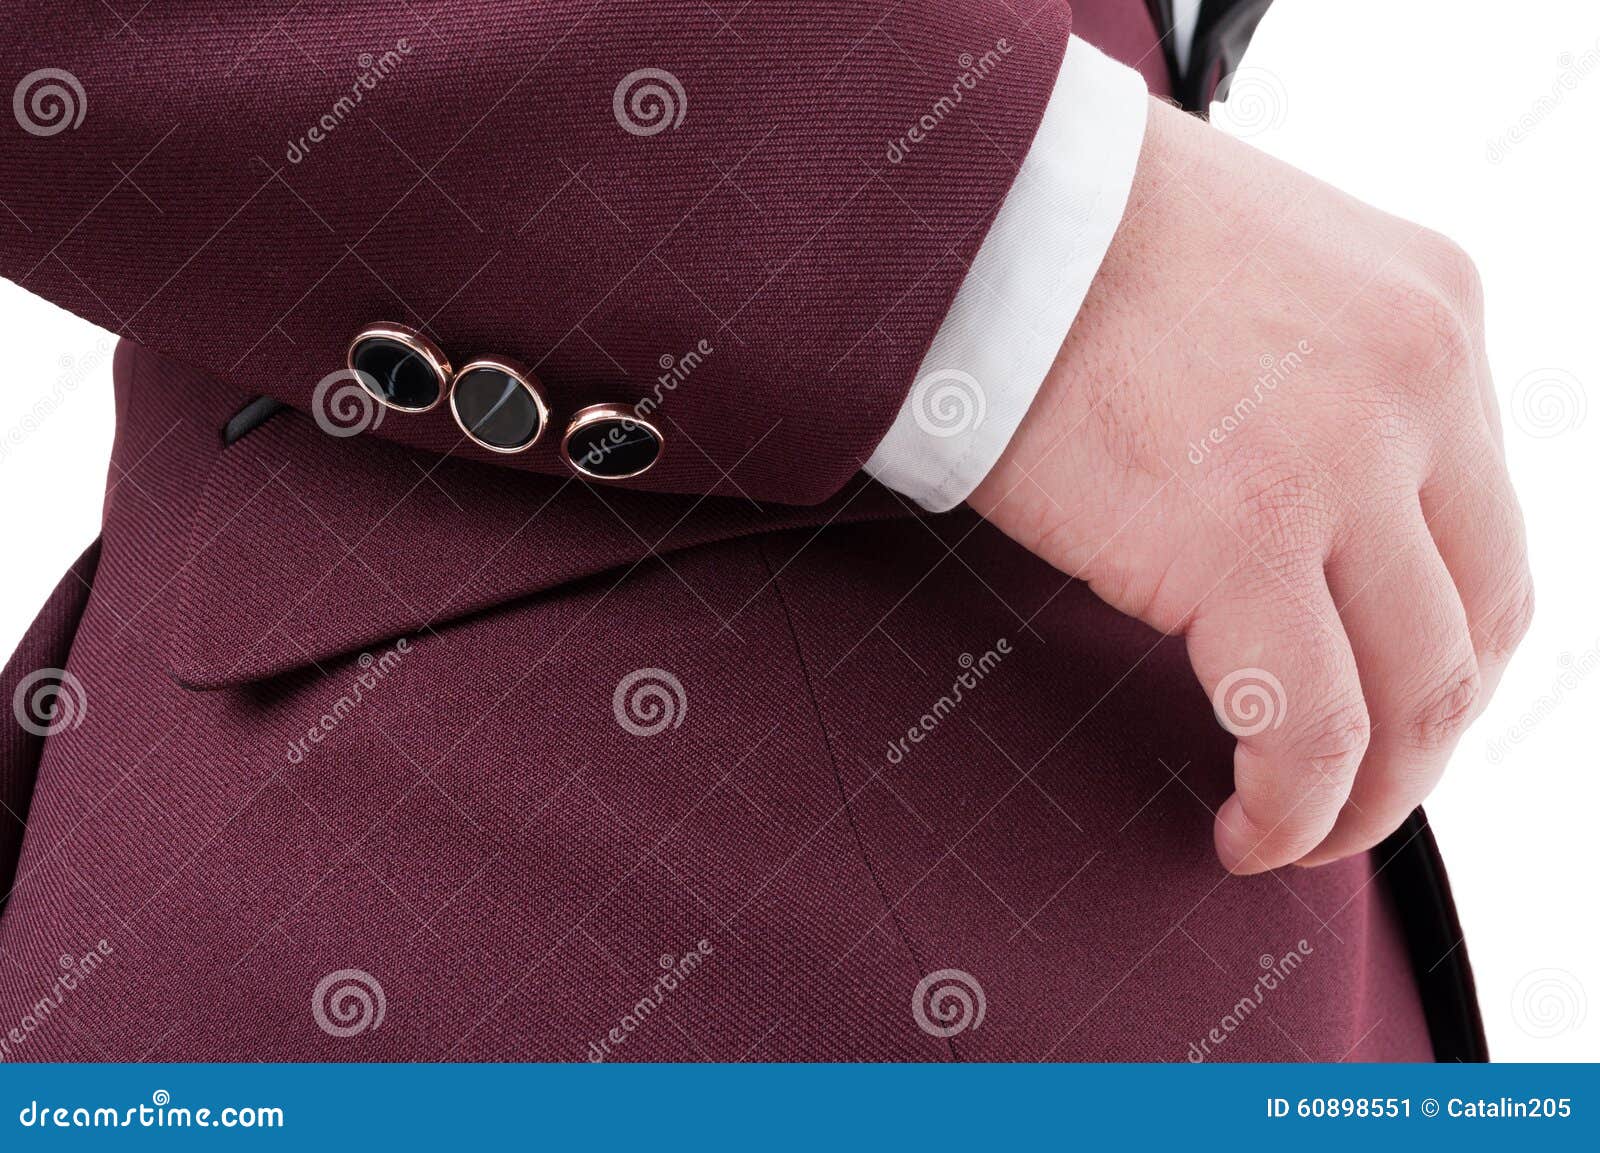 Suit Jacket Sleeve Buttons: Number & Styles